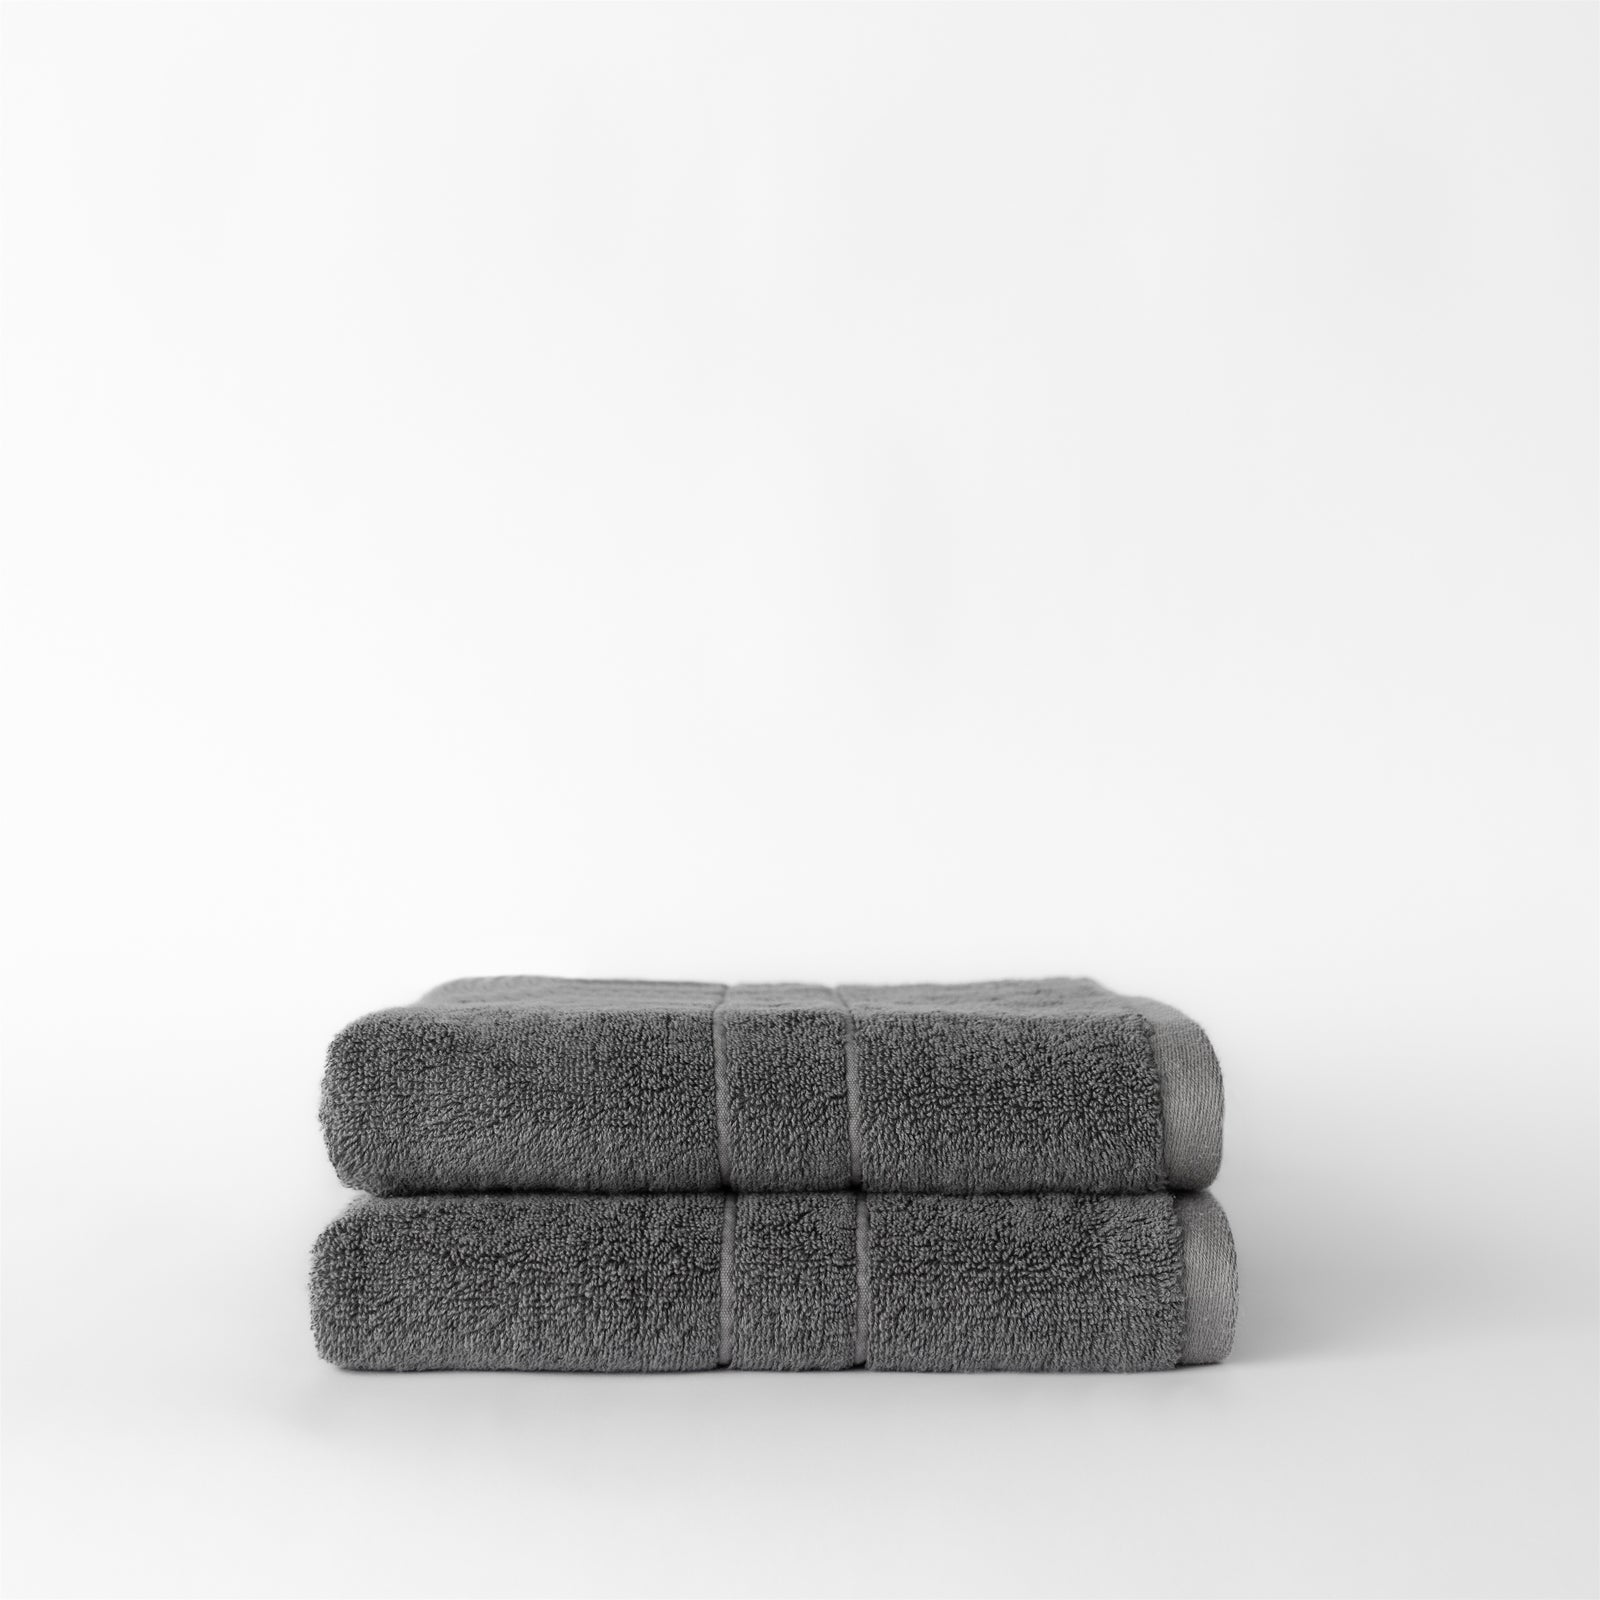 Premium Plush Hand Towels in the color charcoal. Photo of Complete Premium Plush Hand Towel taken with white background 